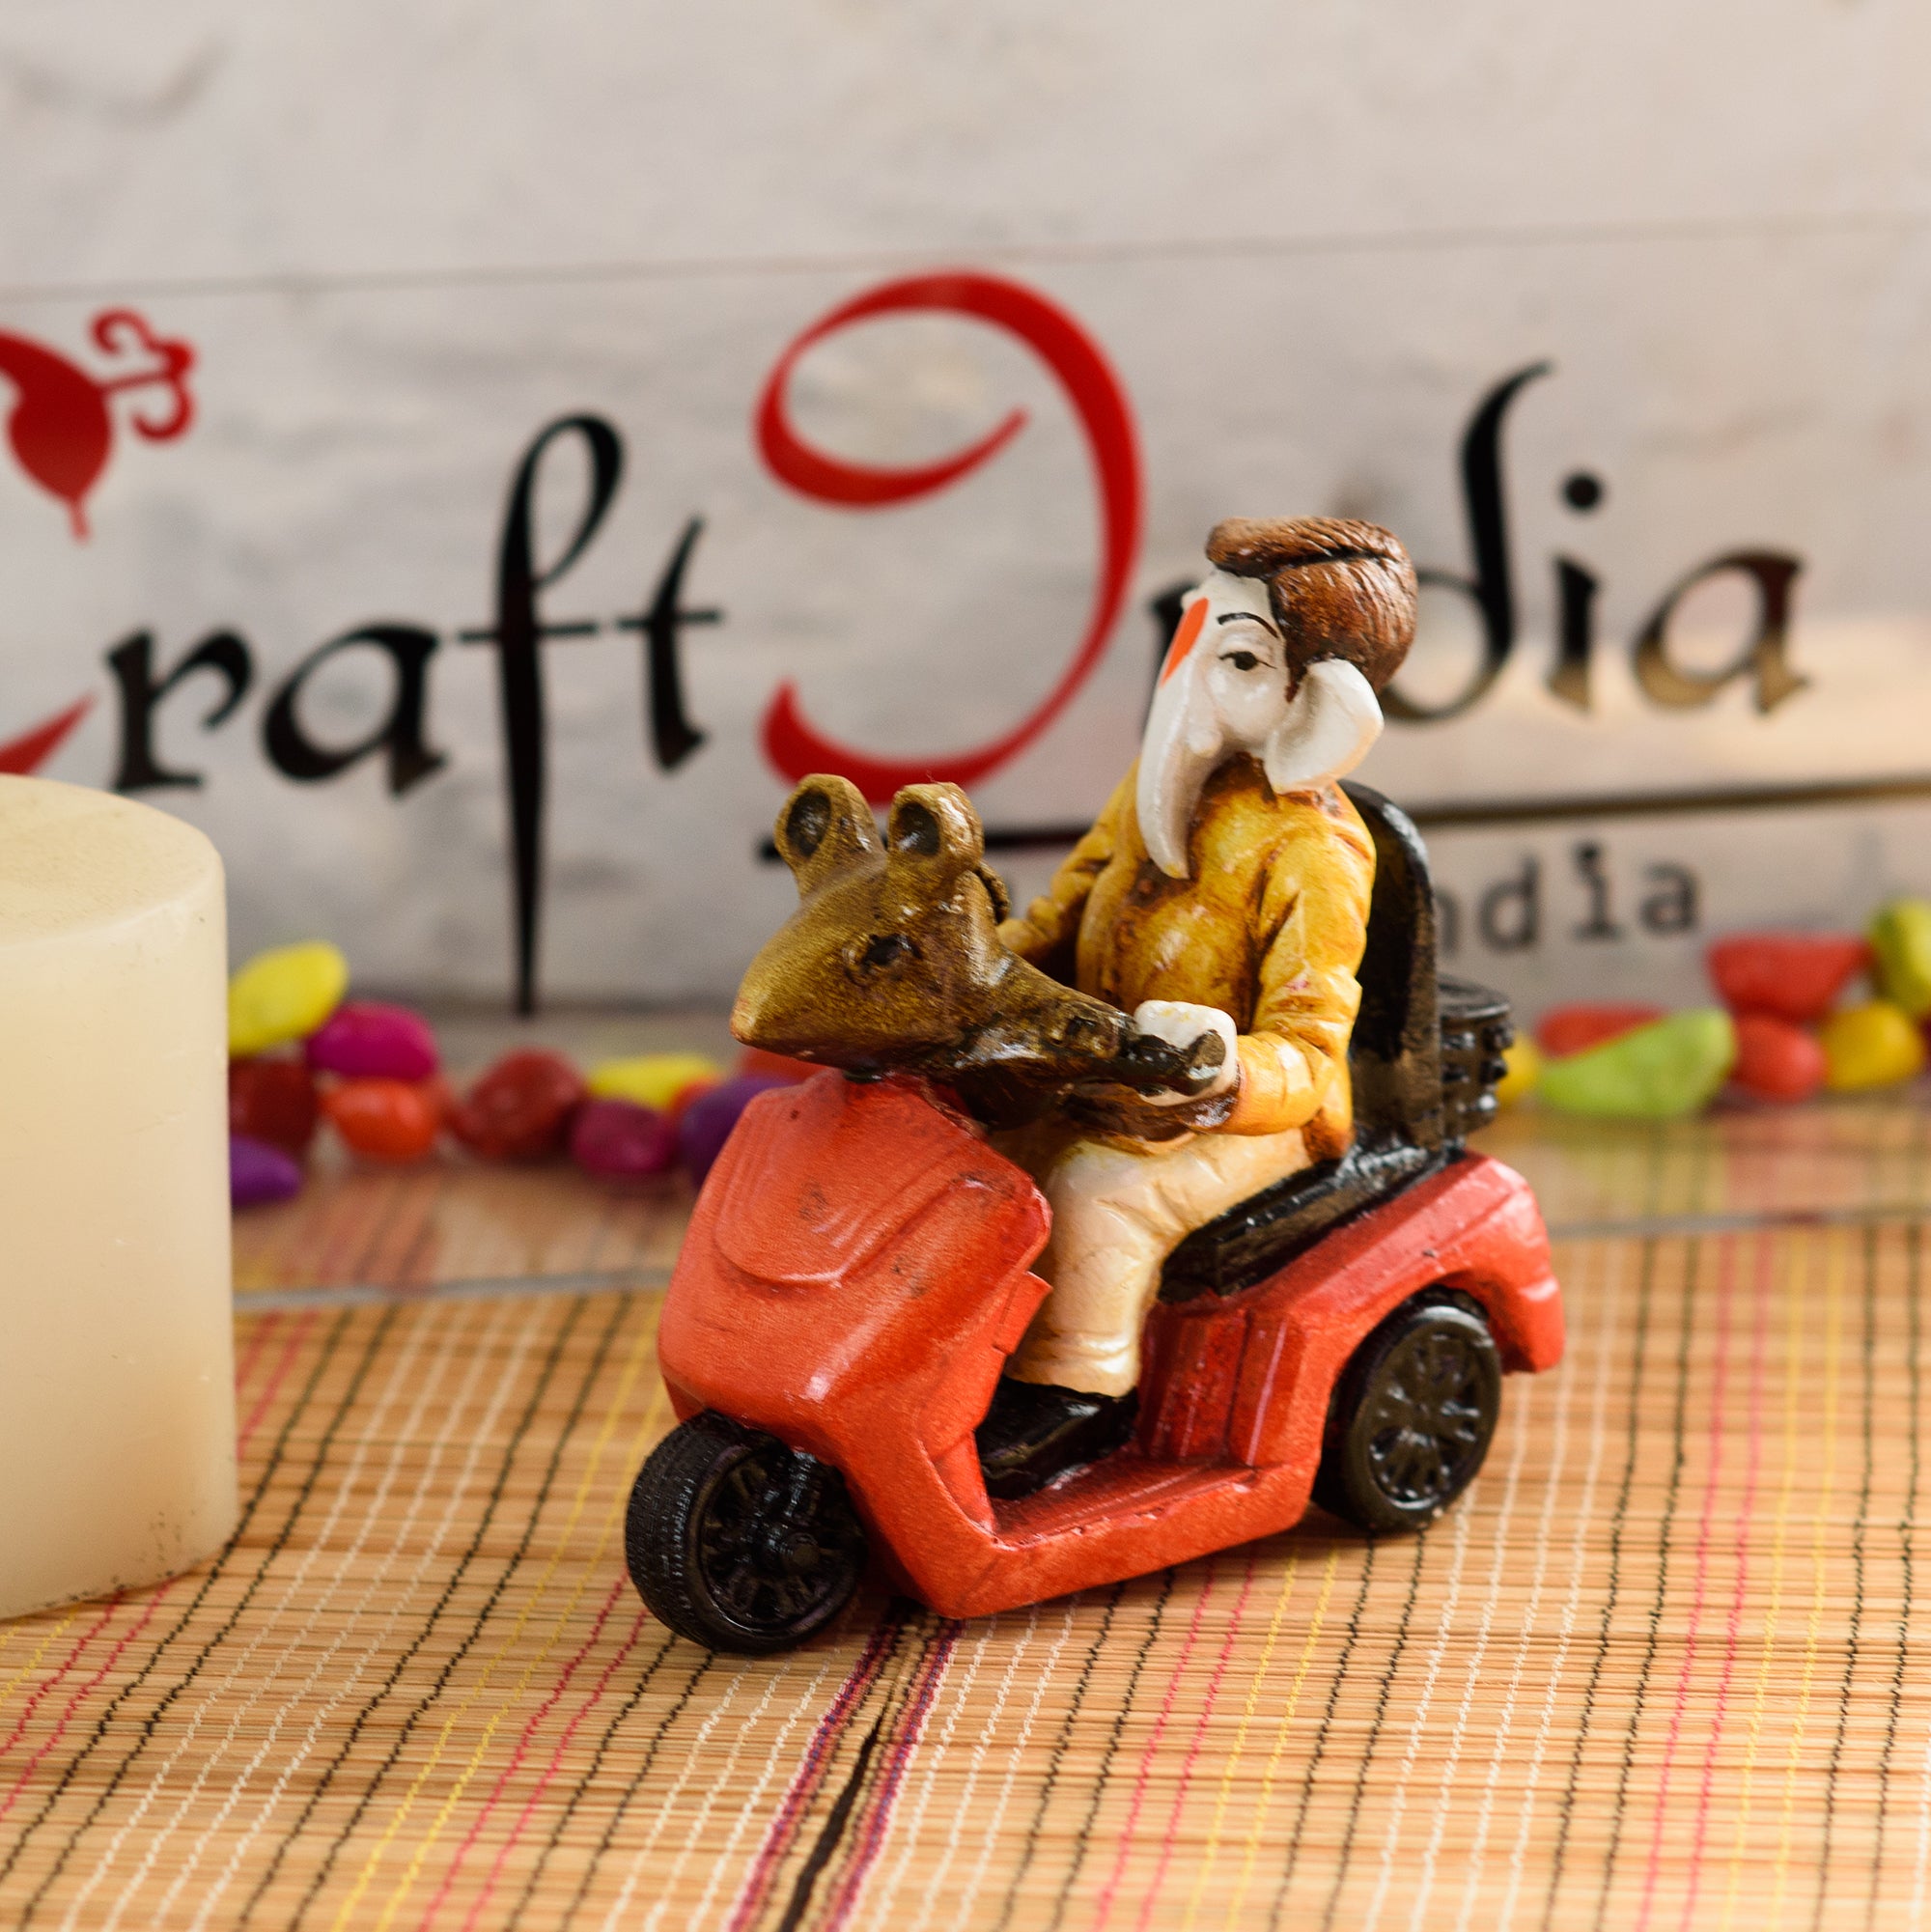 Polyresin Lord Ganesha Idol riding Scooter (Red and Yellow)